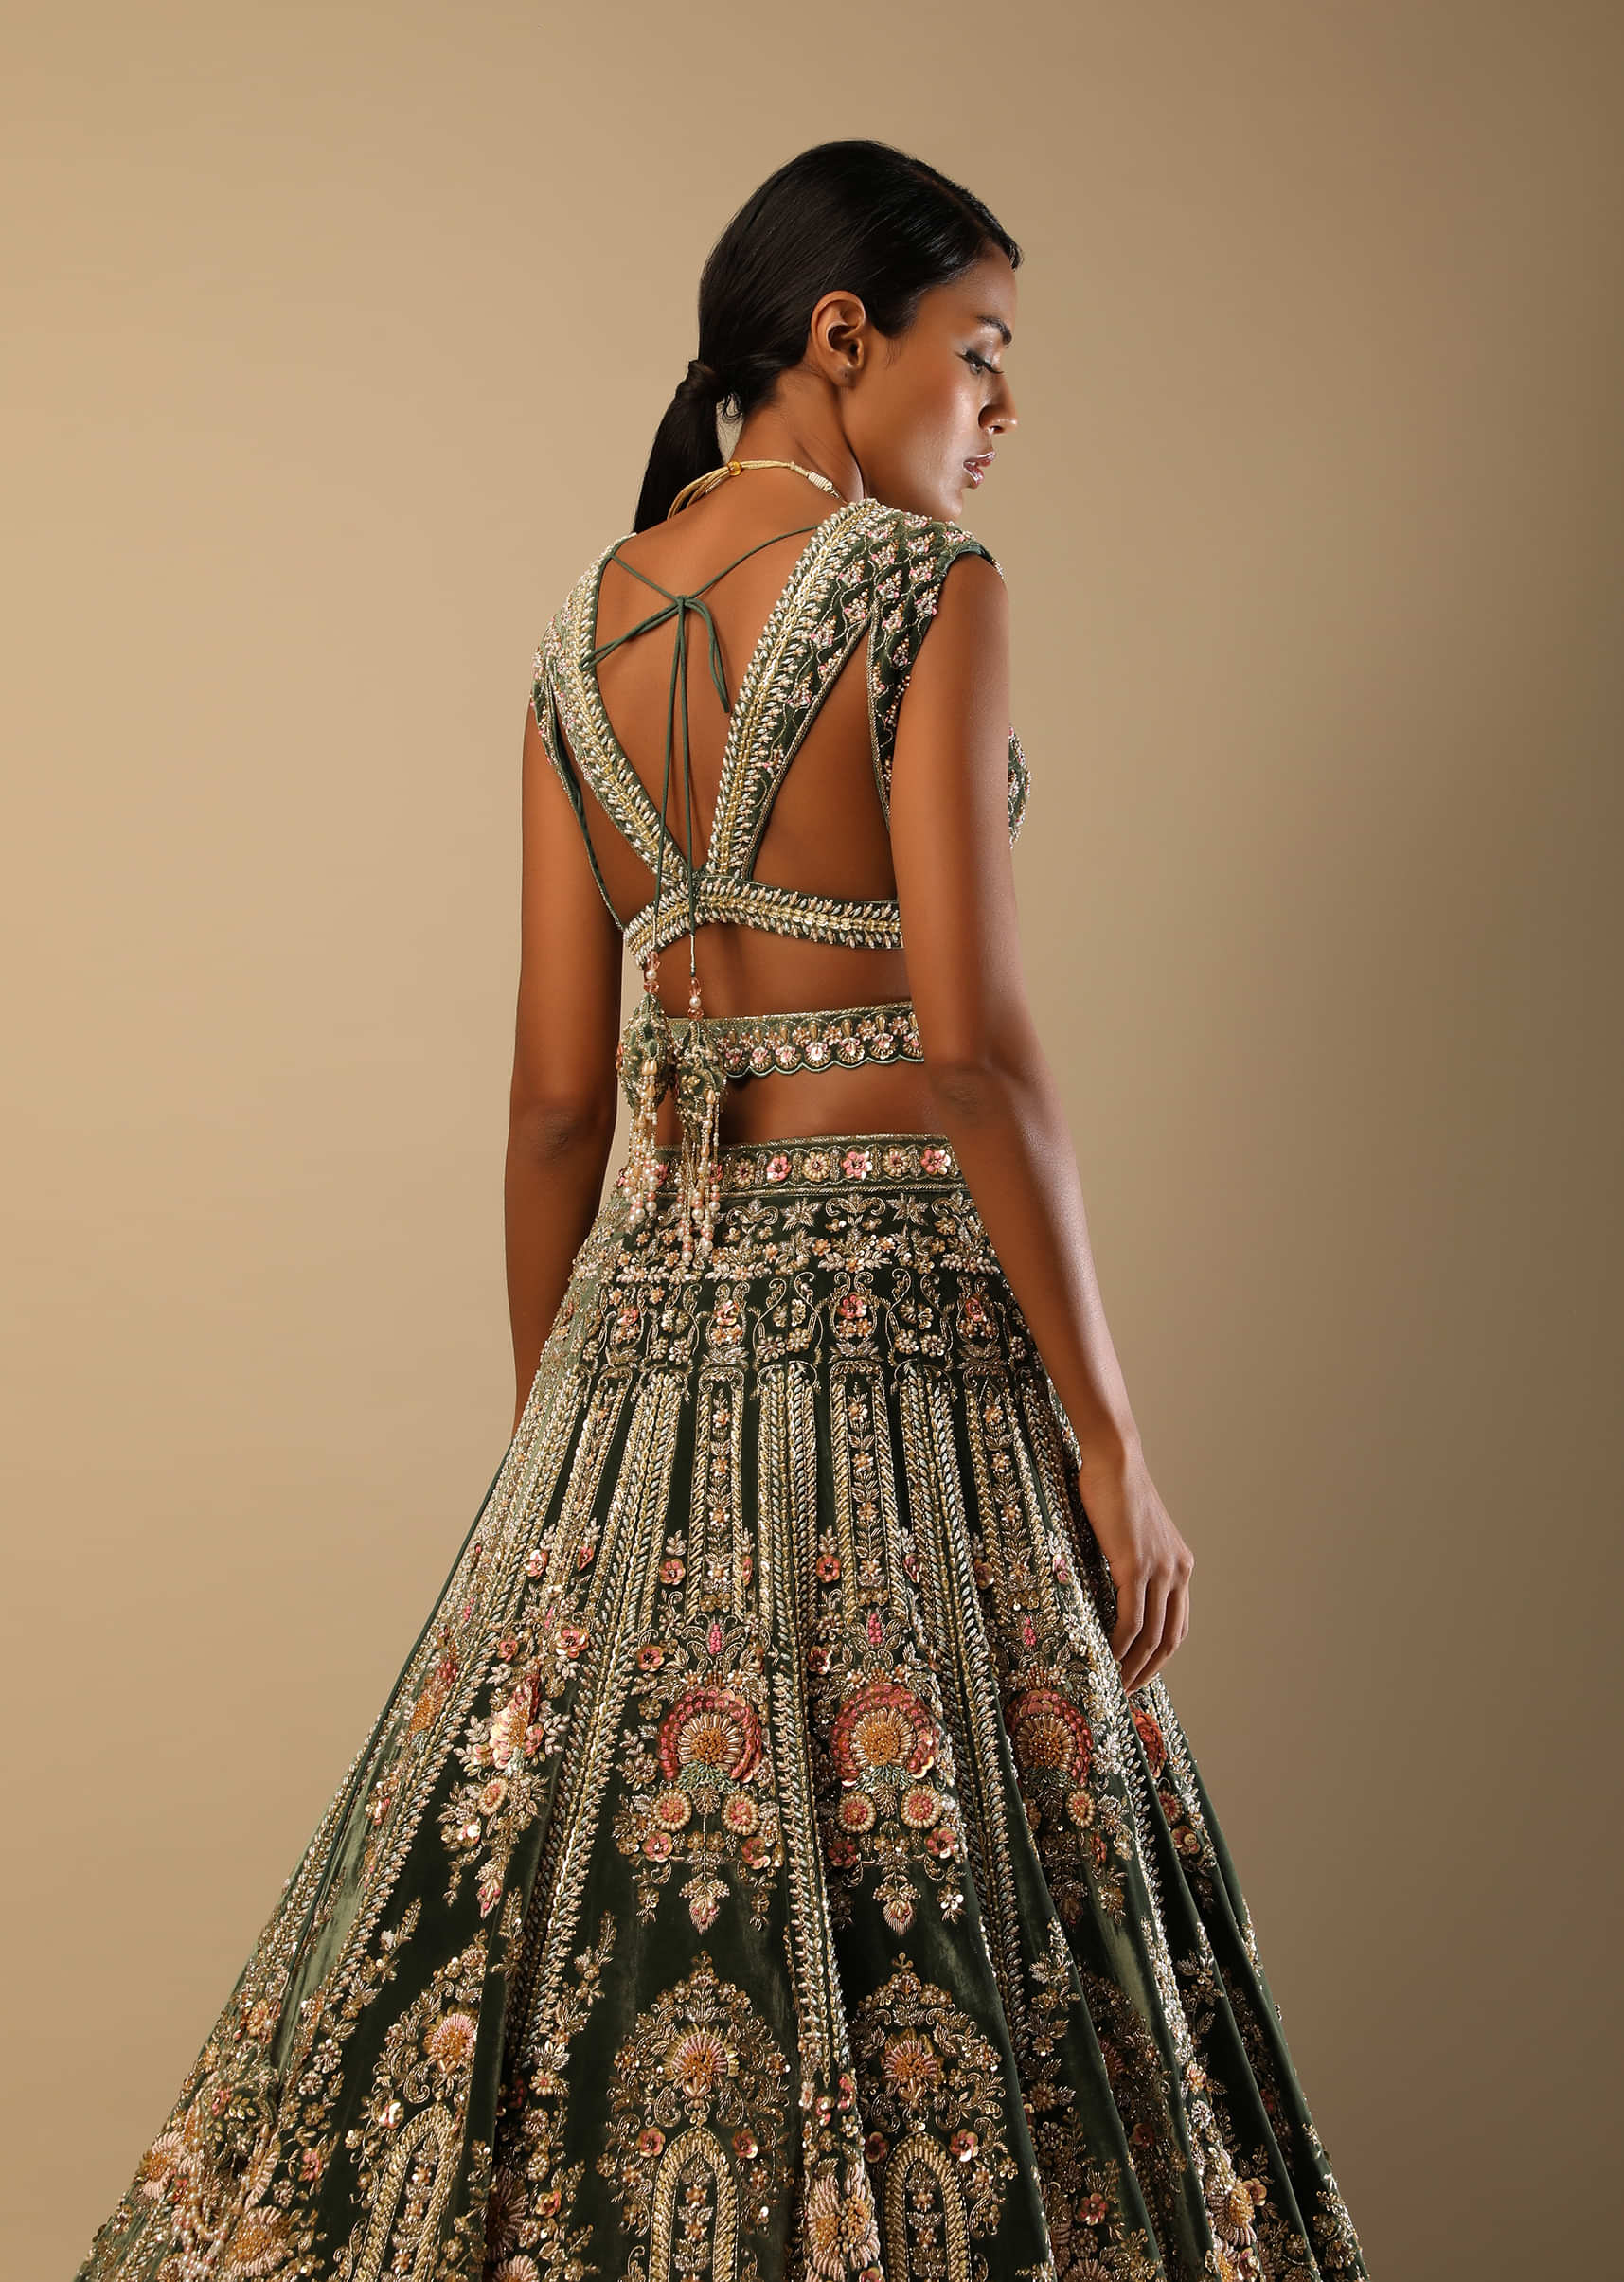 Palace Green Lehenga Choli In Velvet With Multi Colored Hand Embroidered Heritage Kalis With Hints Of Flowers 